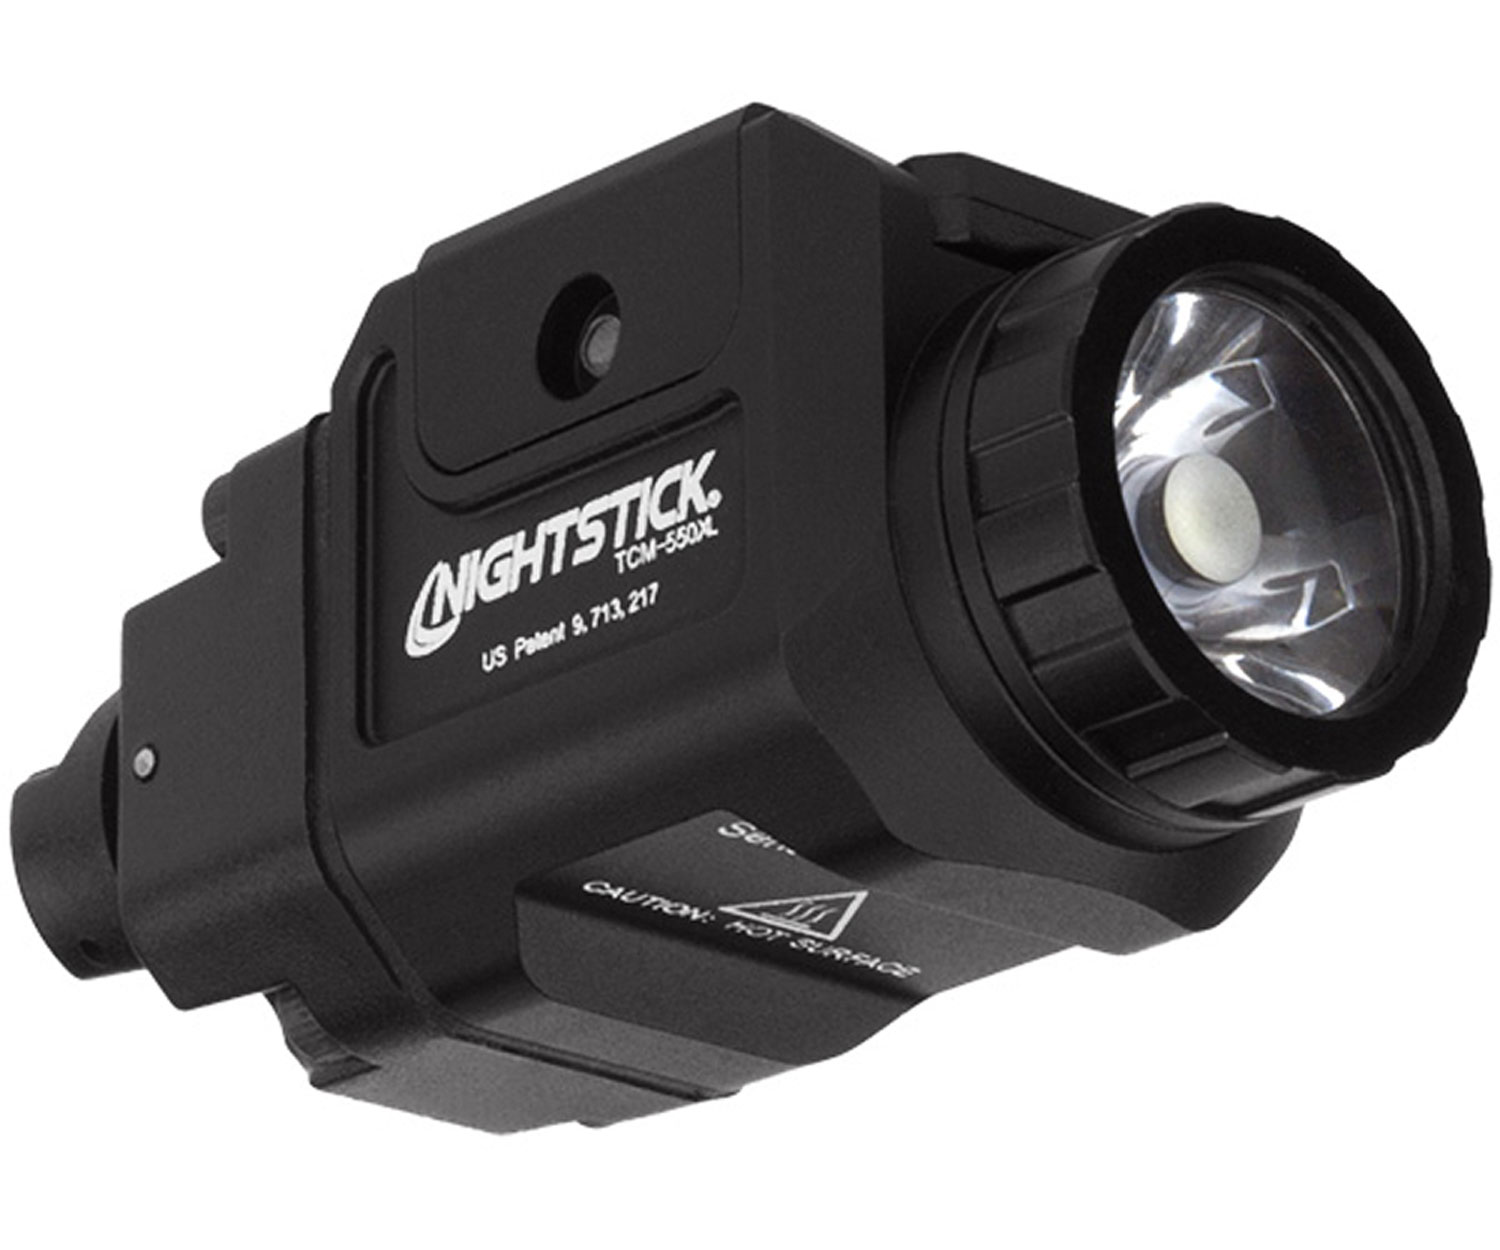 NIGHTSTICK XTREME LUMENS METAL COMPACT WEAPON MOUNTED LIGHT